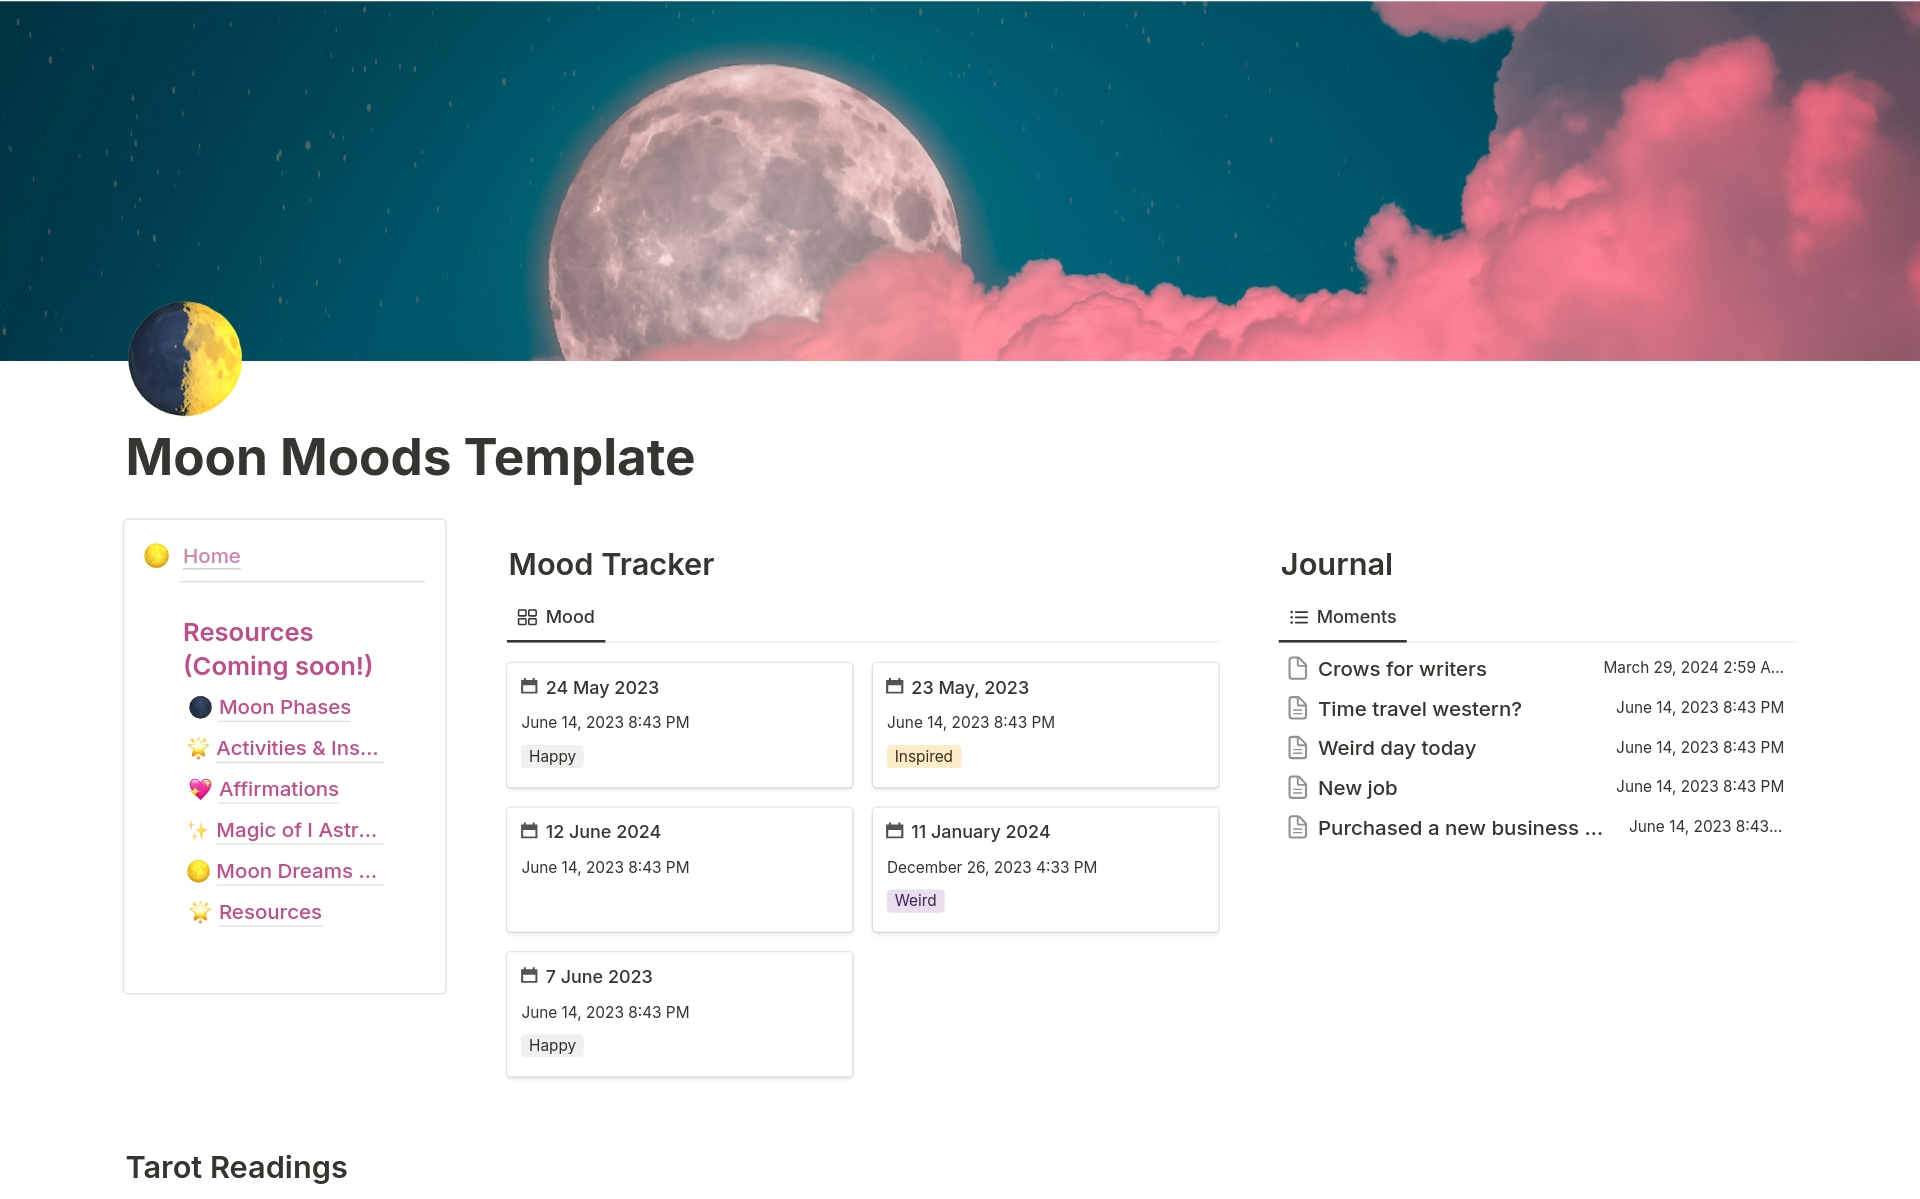 Use the Moon Mood Tracker + Tarot Journal to jot down how you're feeling throughout the day and document the moon phases and her journey through the signs, as well as aspects to the moon.